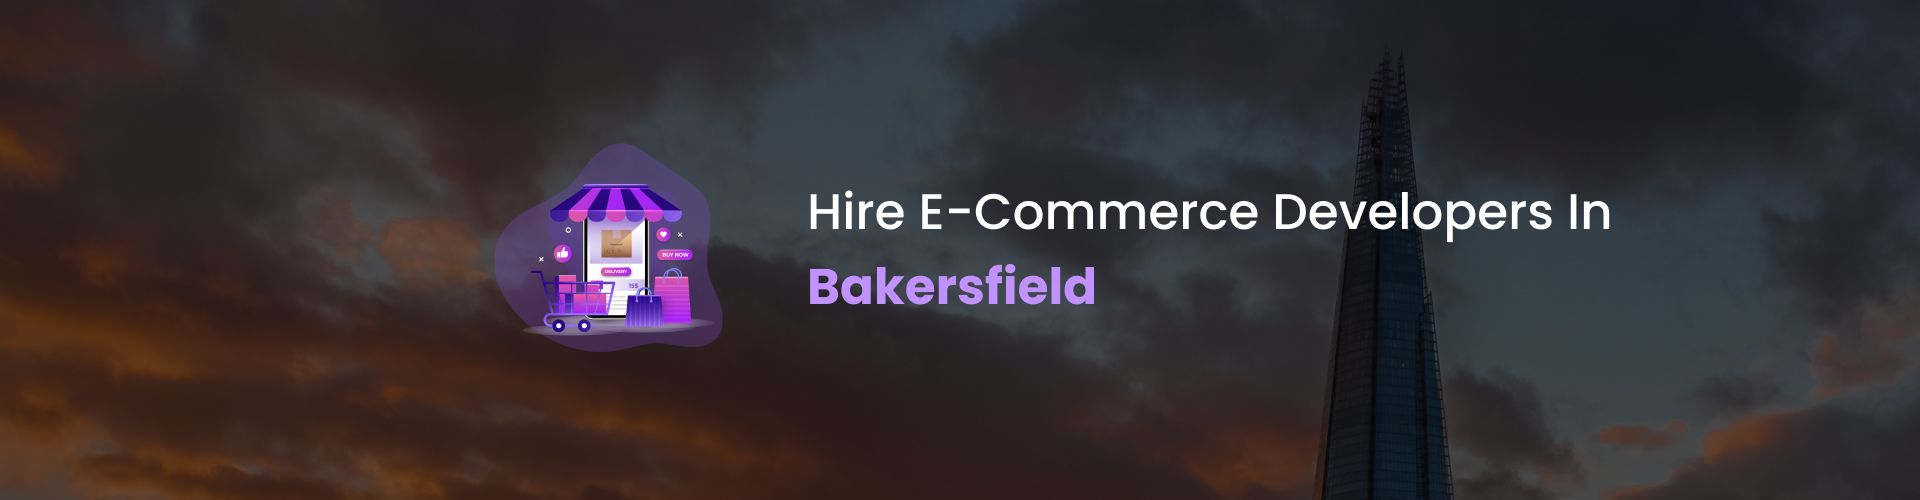 hire ecommerce developers in bakersfield